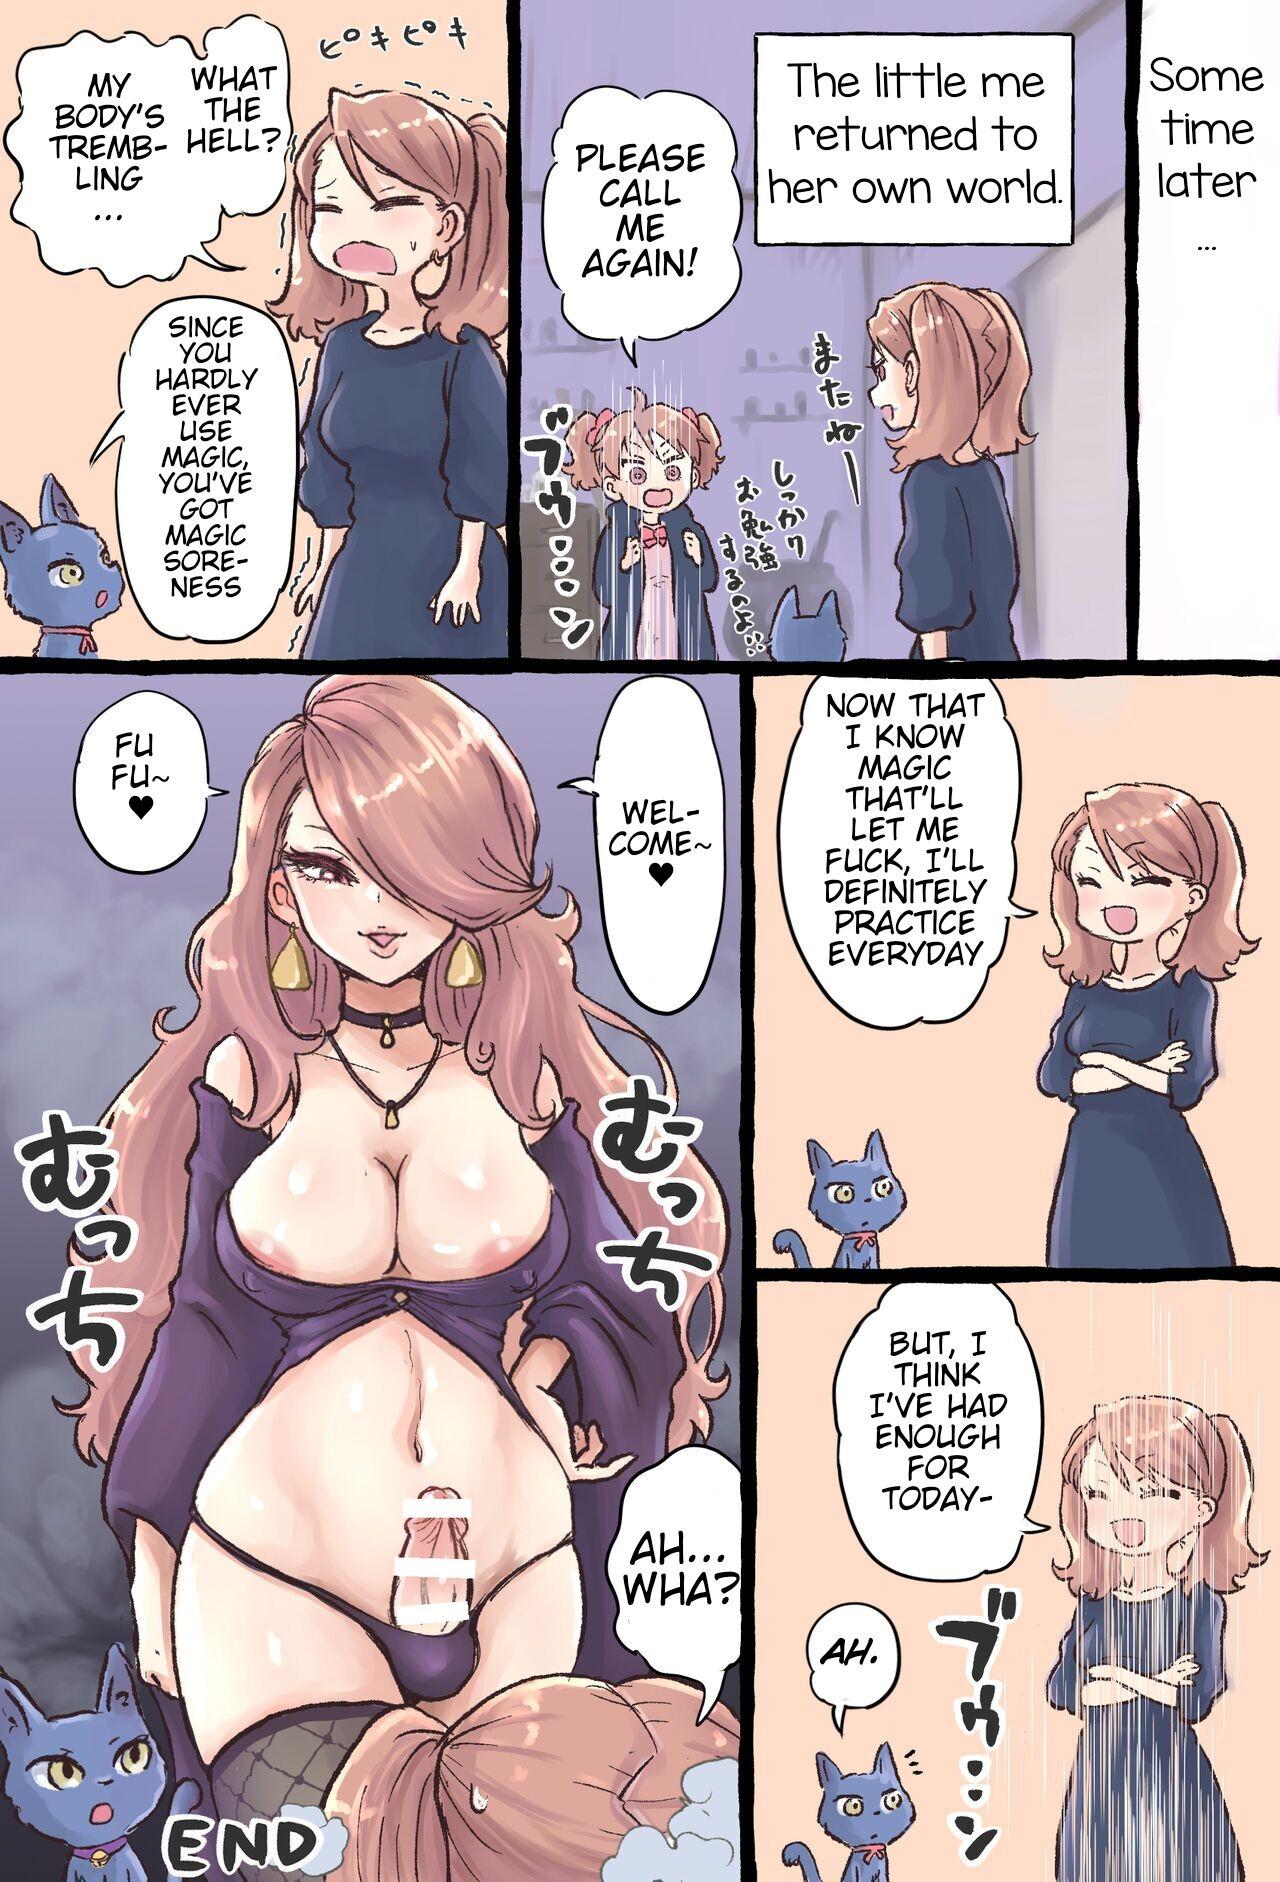 A story about a futanari witch who summons her past self with summoning magic and has sex with her smaller self 16